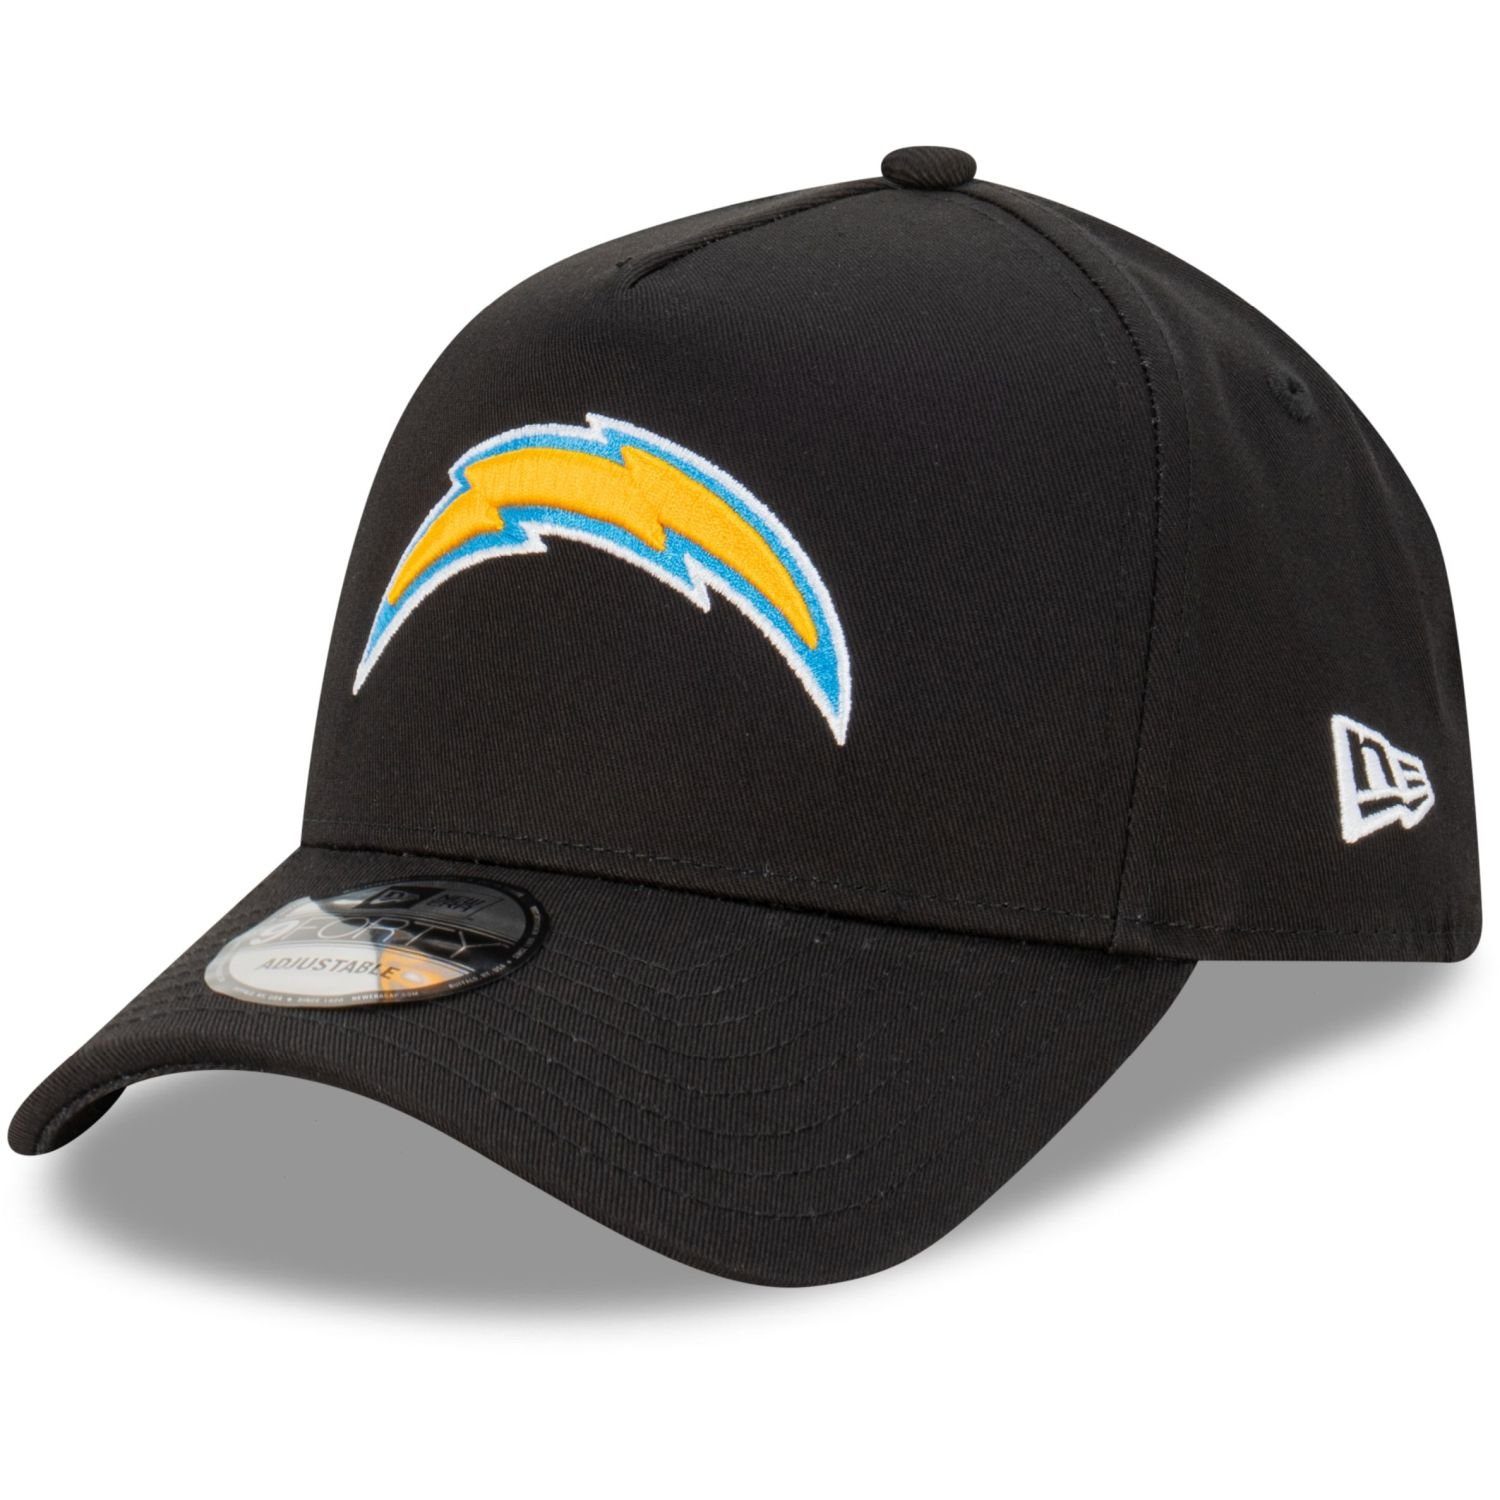 New Era Trucker Cap 9Forty AFrame Trucker NFL Teams Los Angeles Chargers